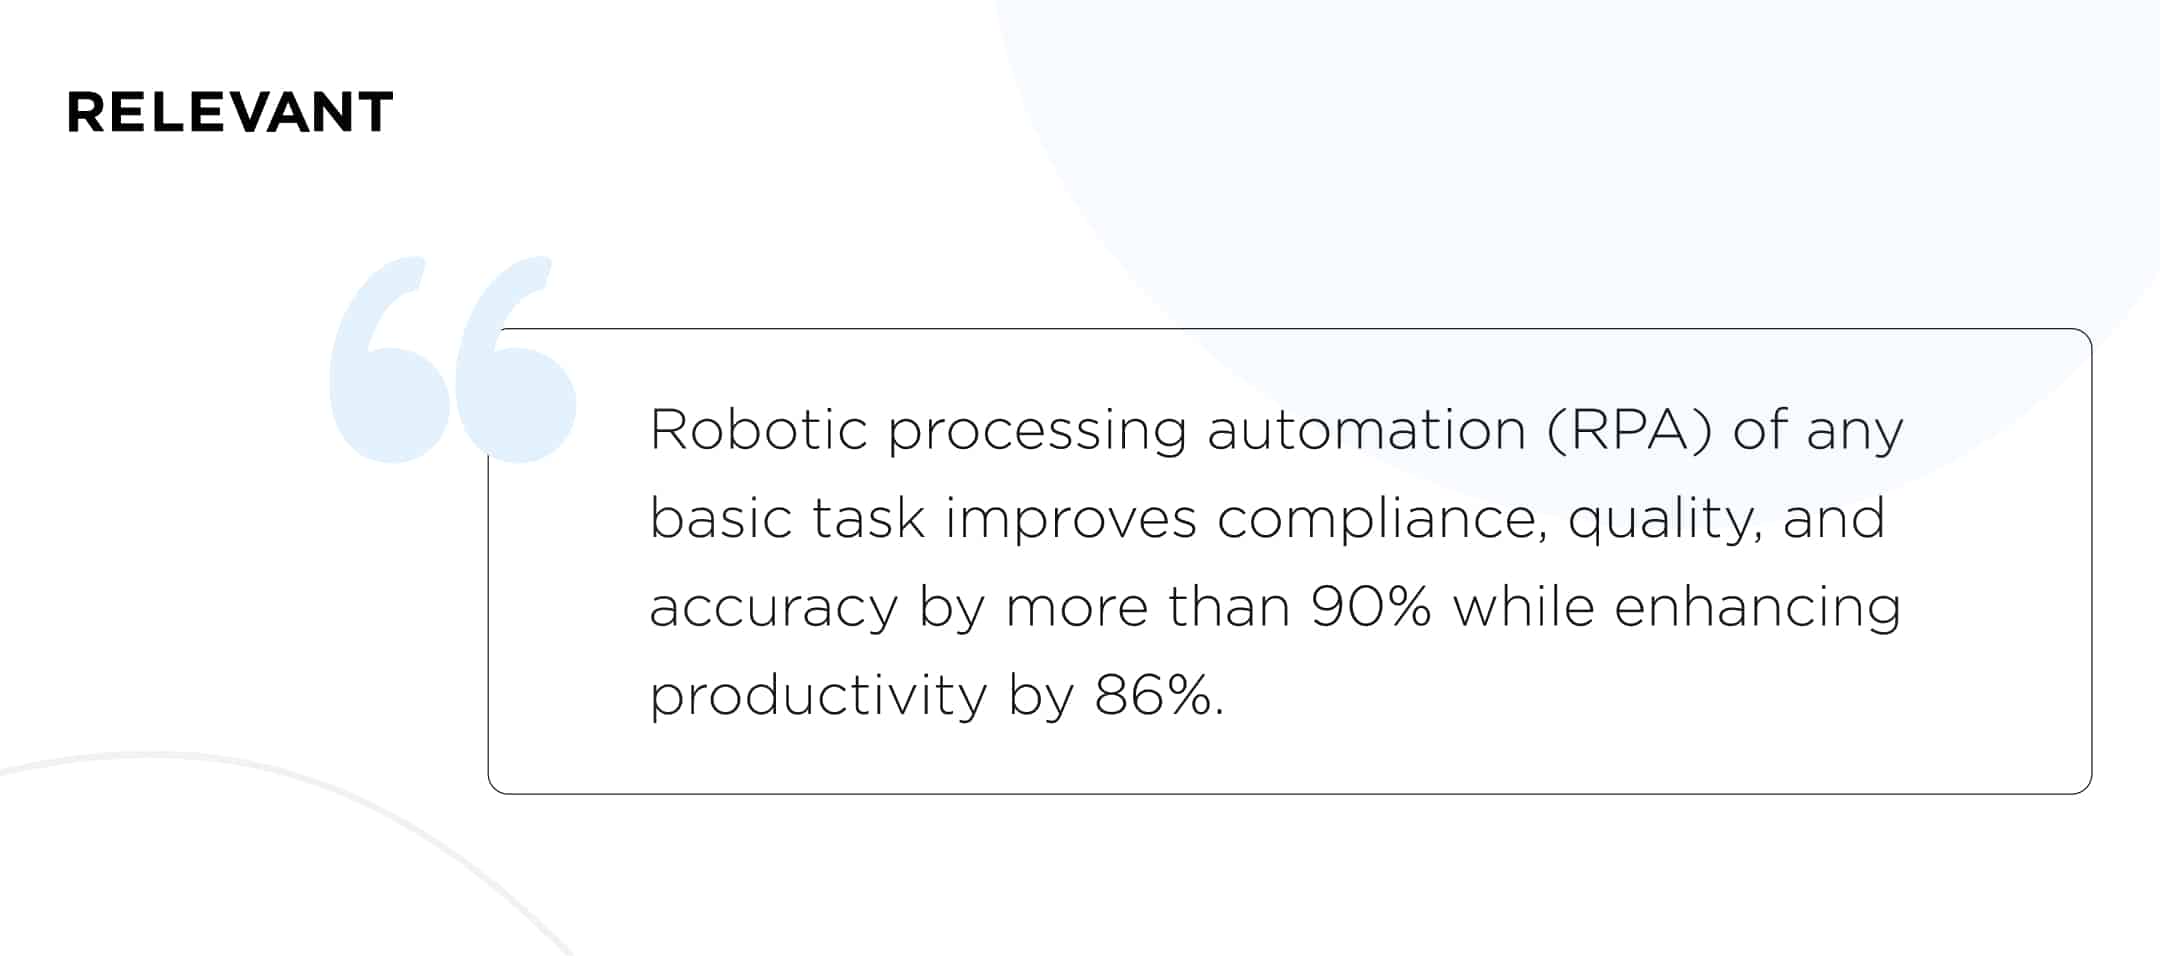 Robotic processing automation (RPA)  benefits